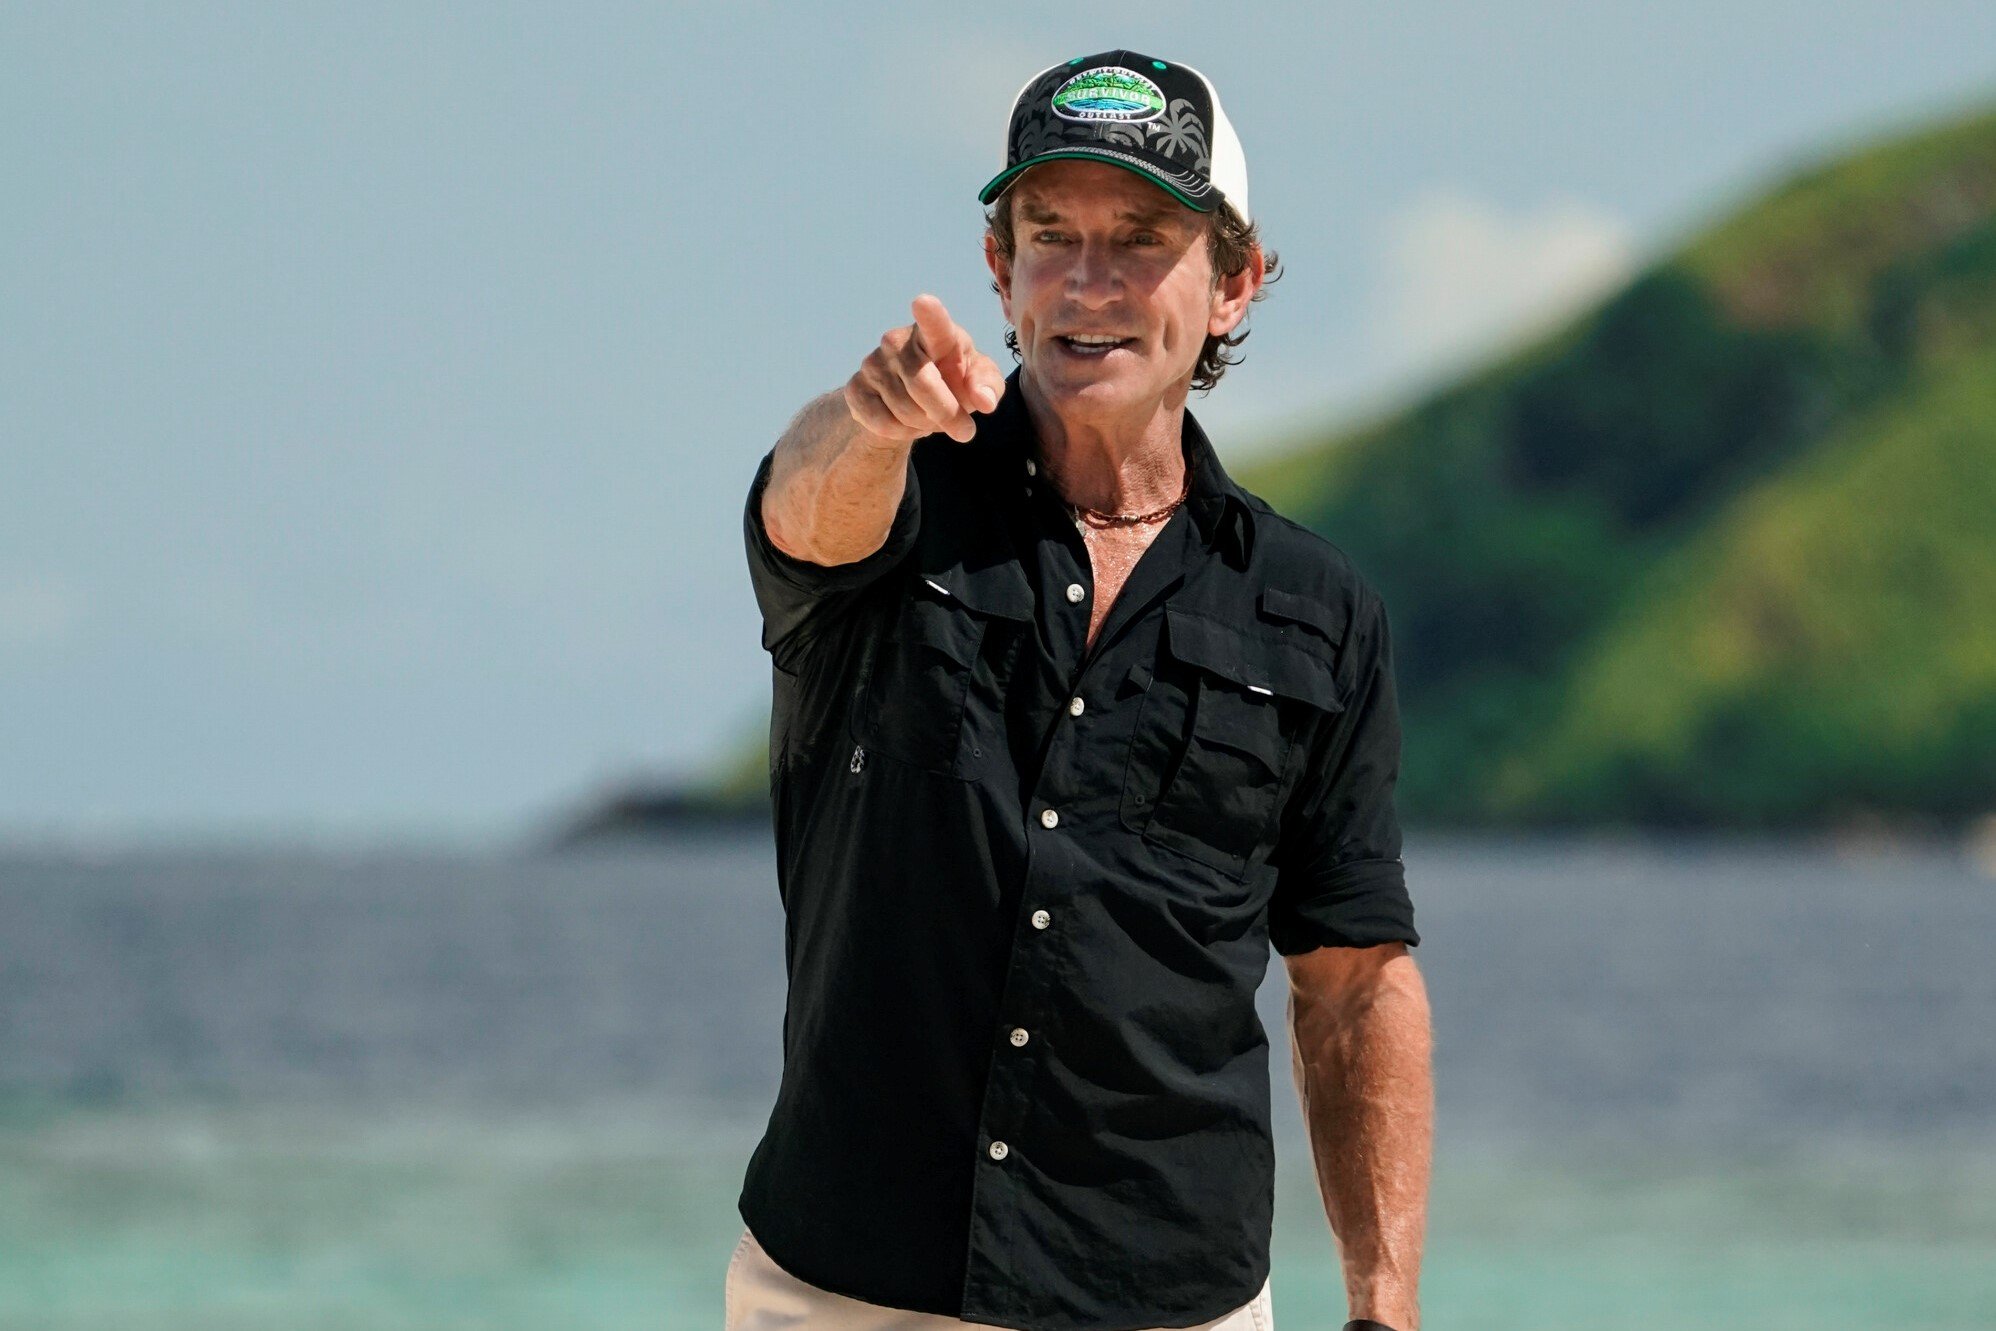 Jeff Probst, who explains twists in 'Survivor' Season 43 on CBS, wears a black button-up shirt and a black, white, and green 'Survivor' baseball cap.